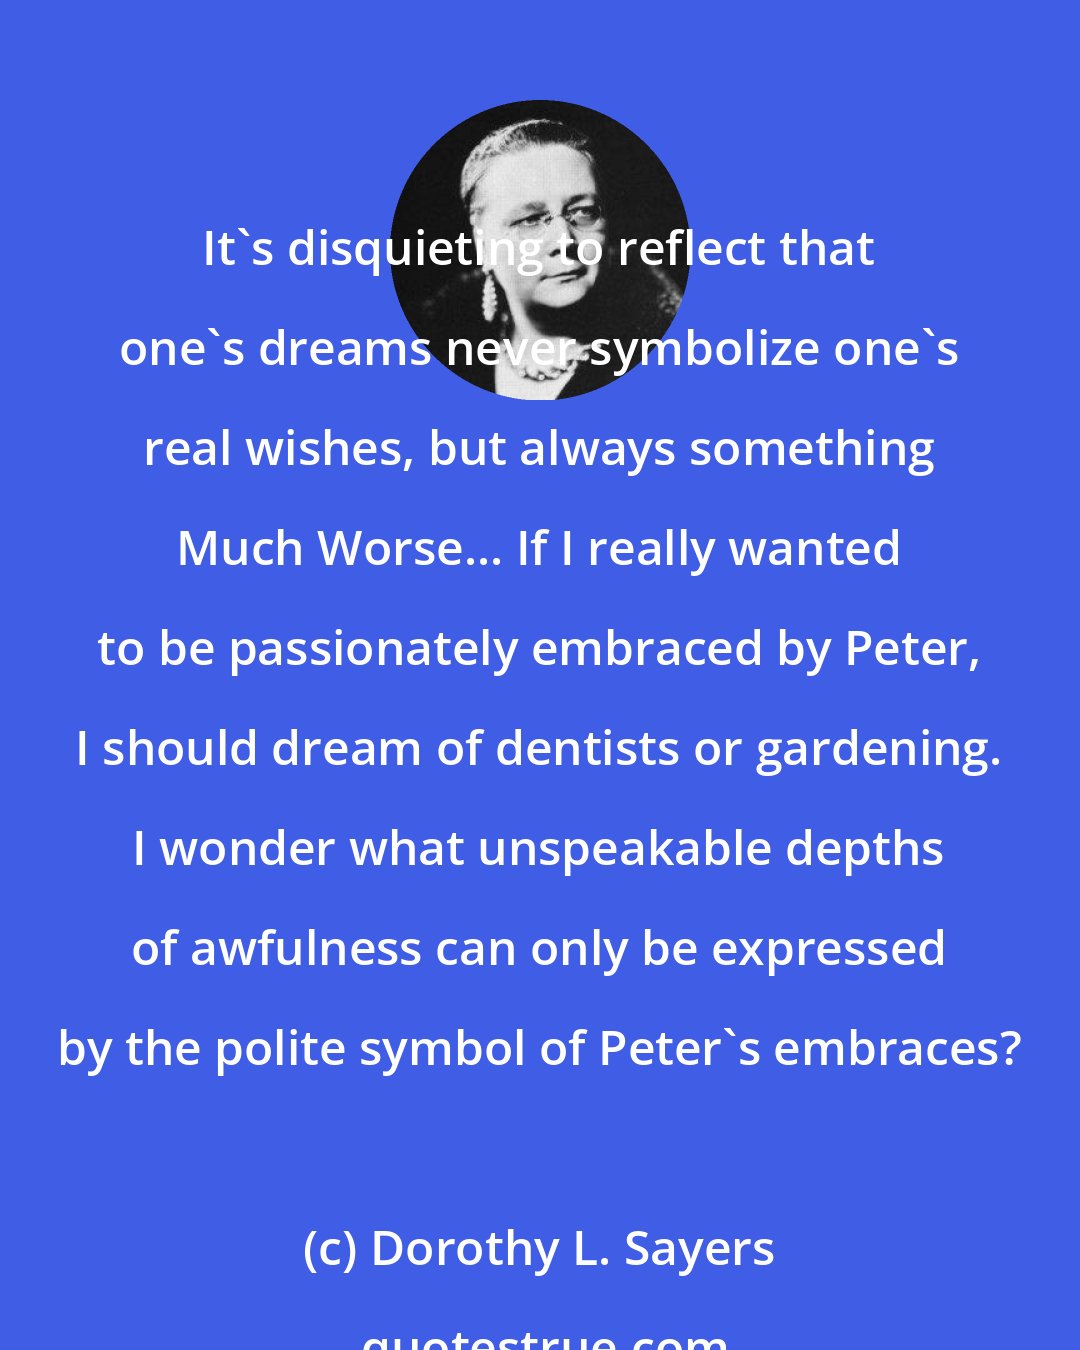 Dorothy L. Sayers: It's disquieting to reflect that one's dreams never symbolize one's real wishes, but always something Much Worse... If I really wanted to be passionately embraced by Peter, I should dream of dentists or gardening. I wonder what unspeakable depths of awfulness can only be expressed by the polite symbol of Peter's embraces?